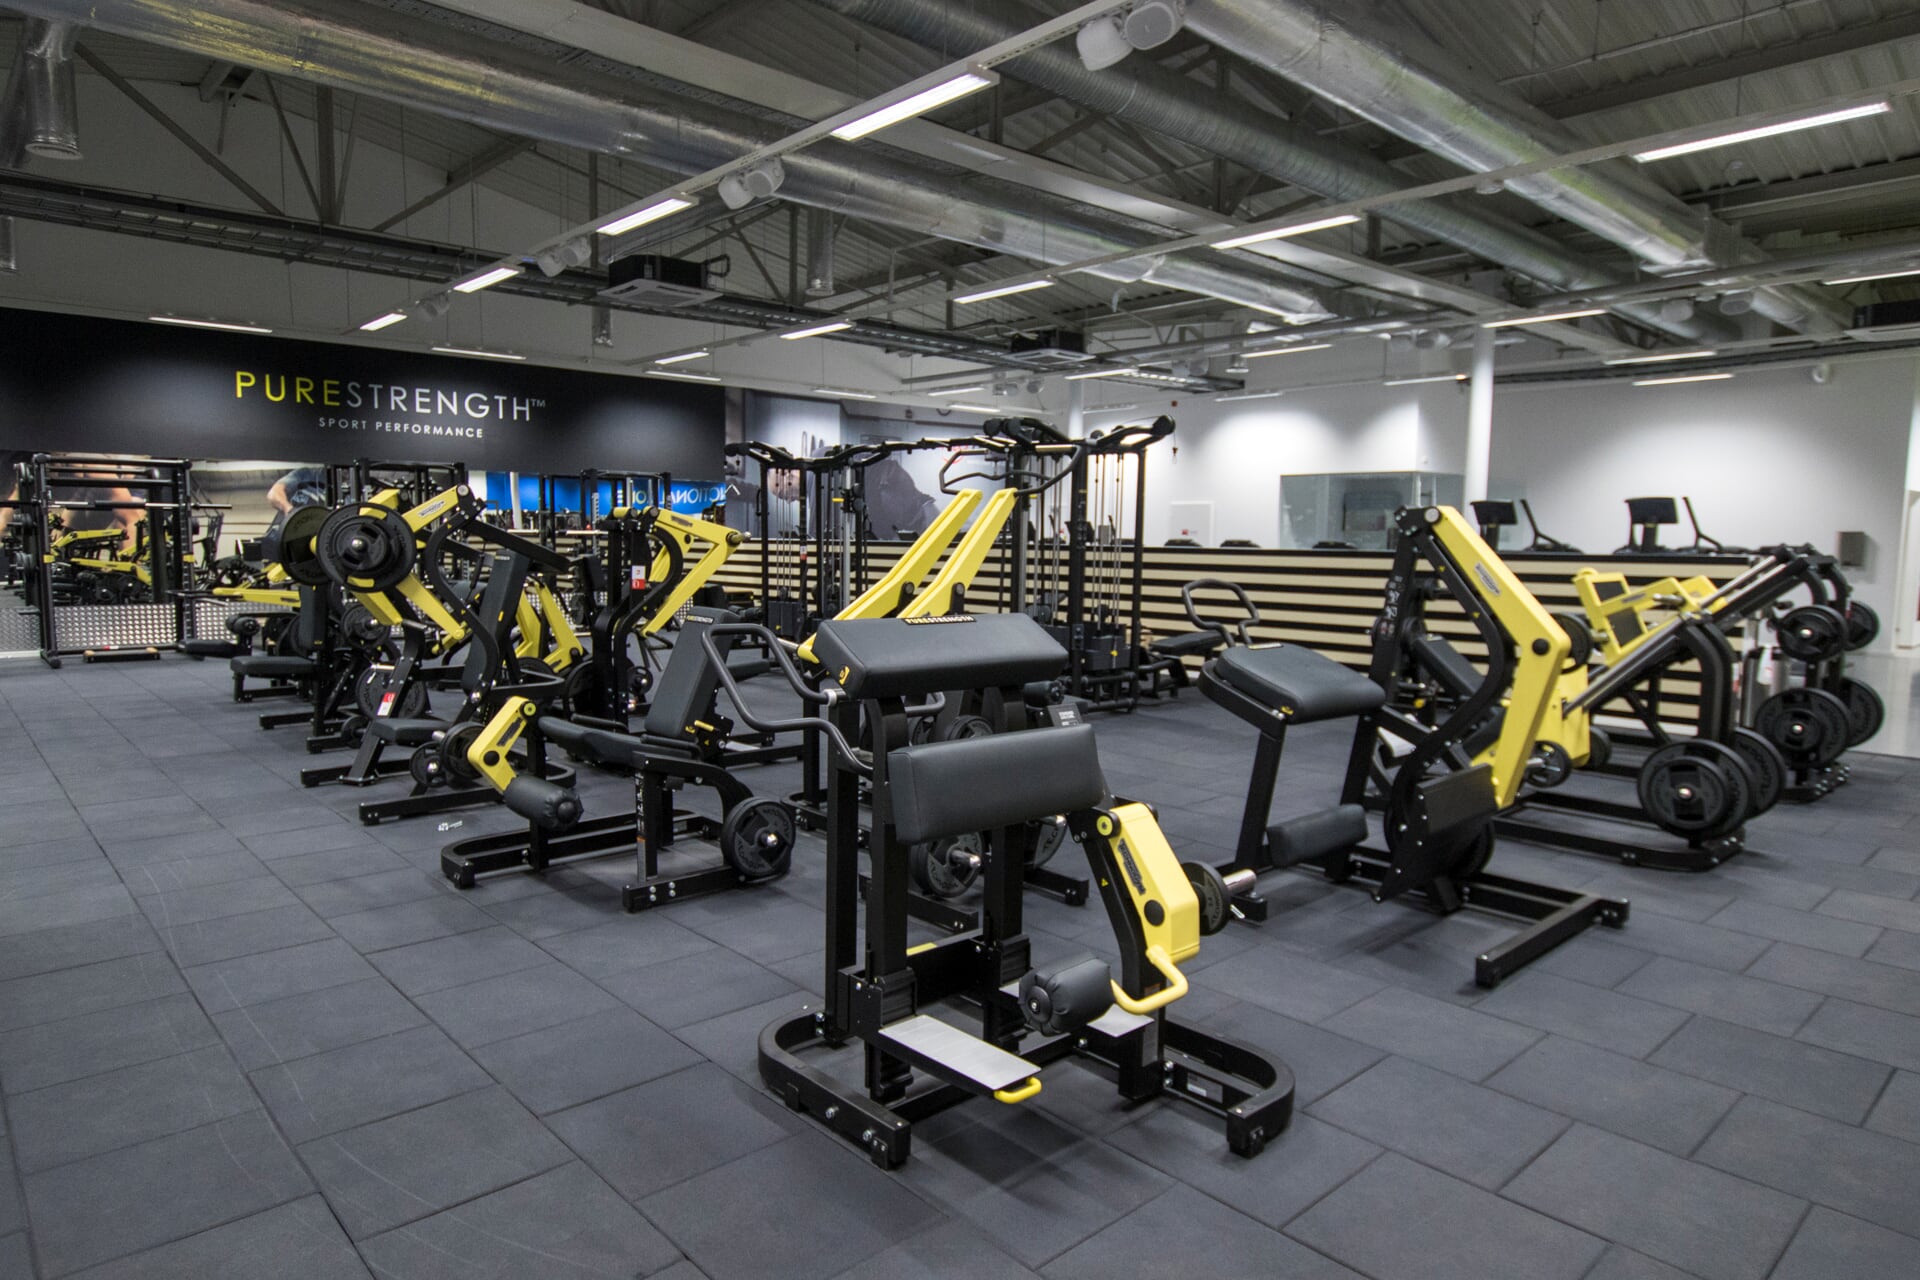 Gyms in Lithuania - TrainAway: Find gyms near me and buy ...